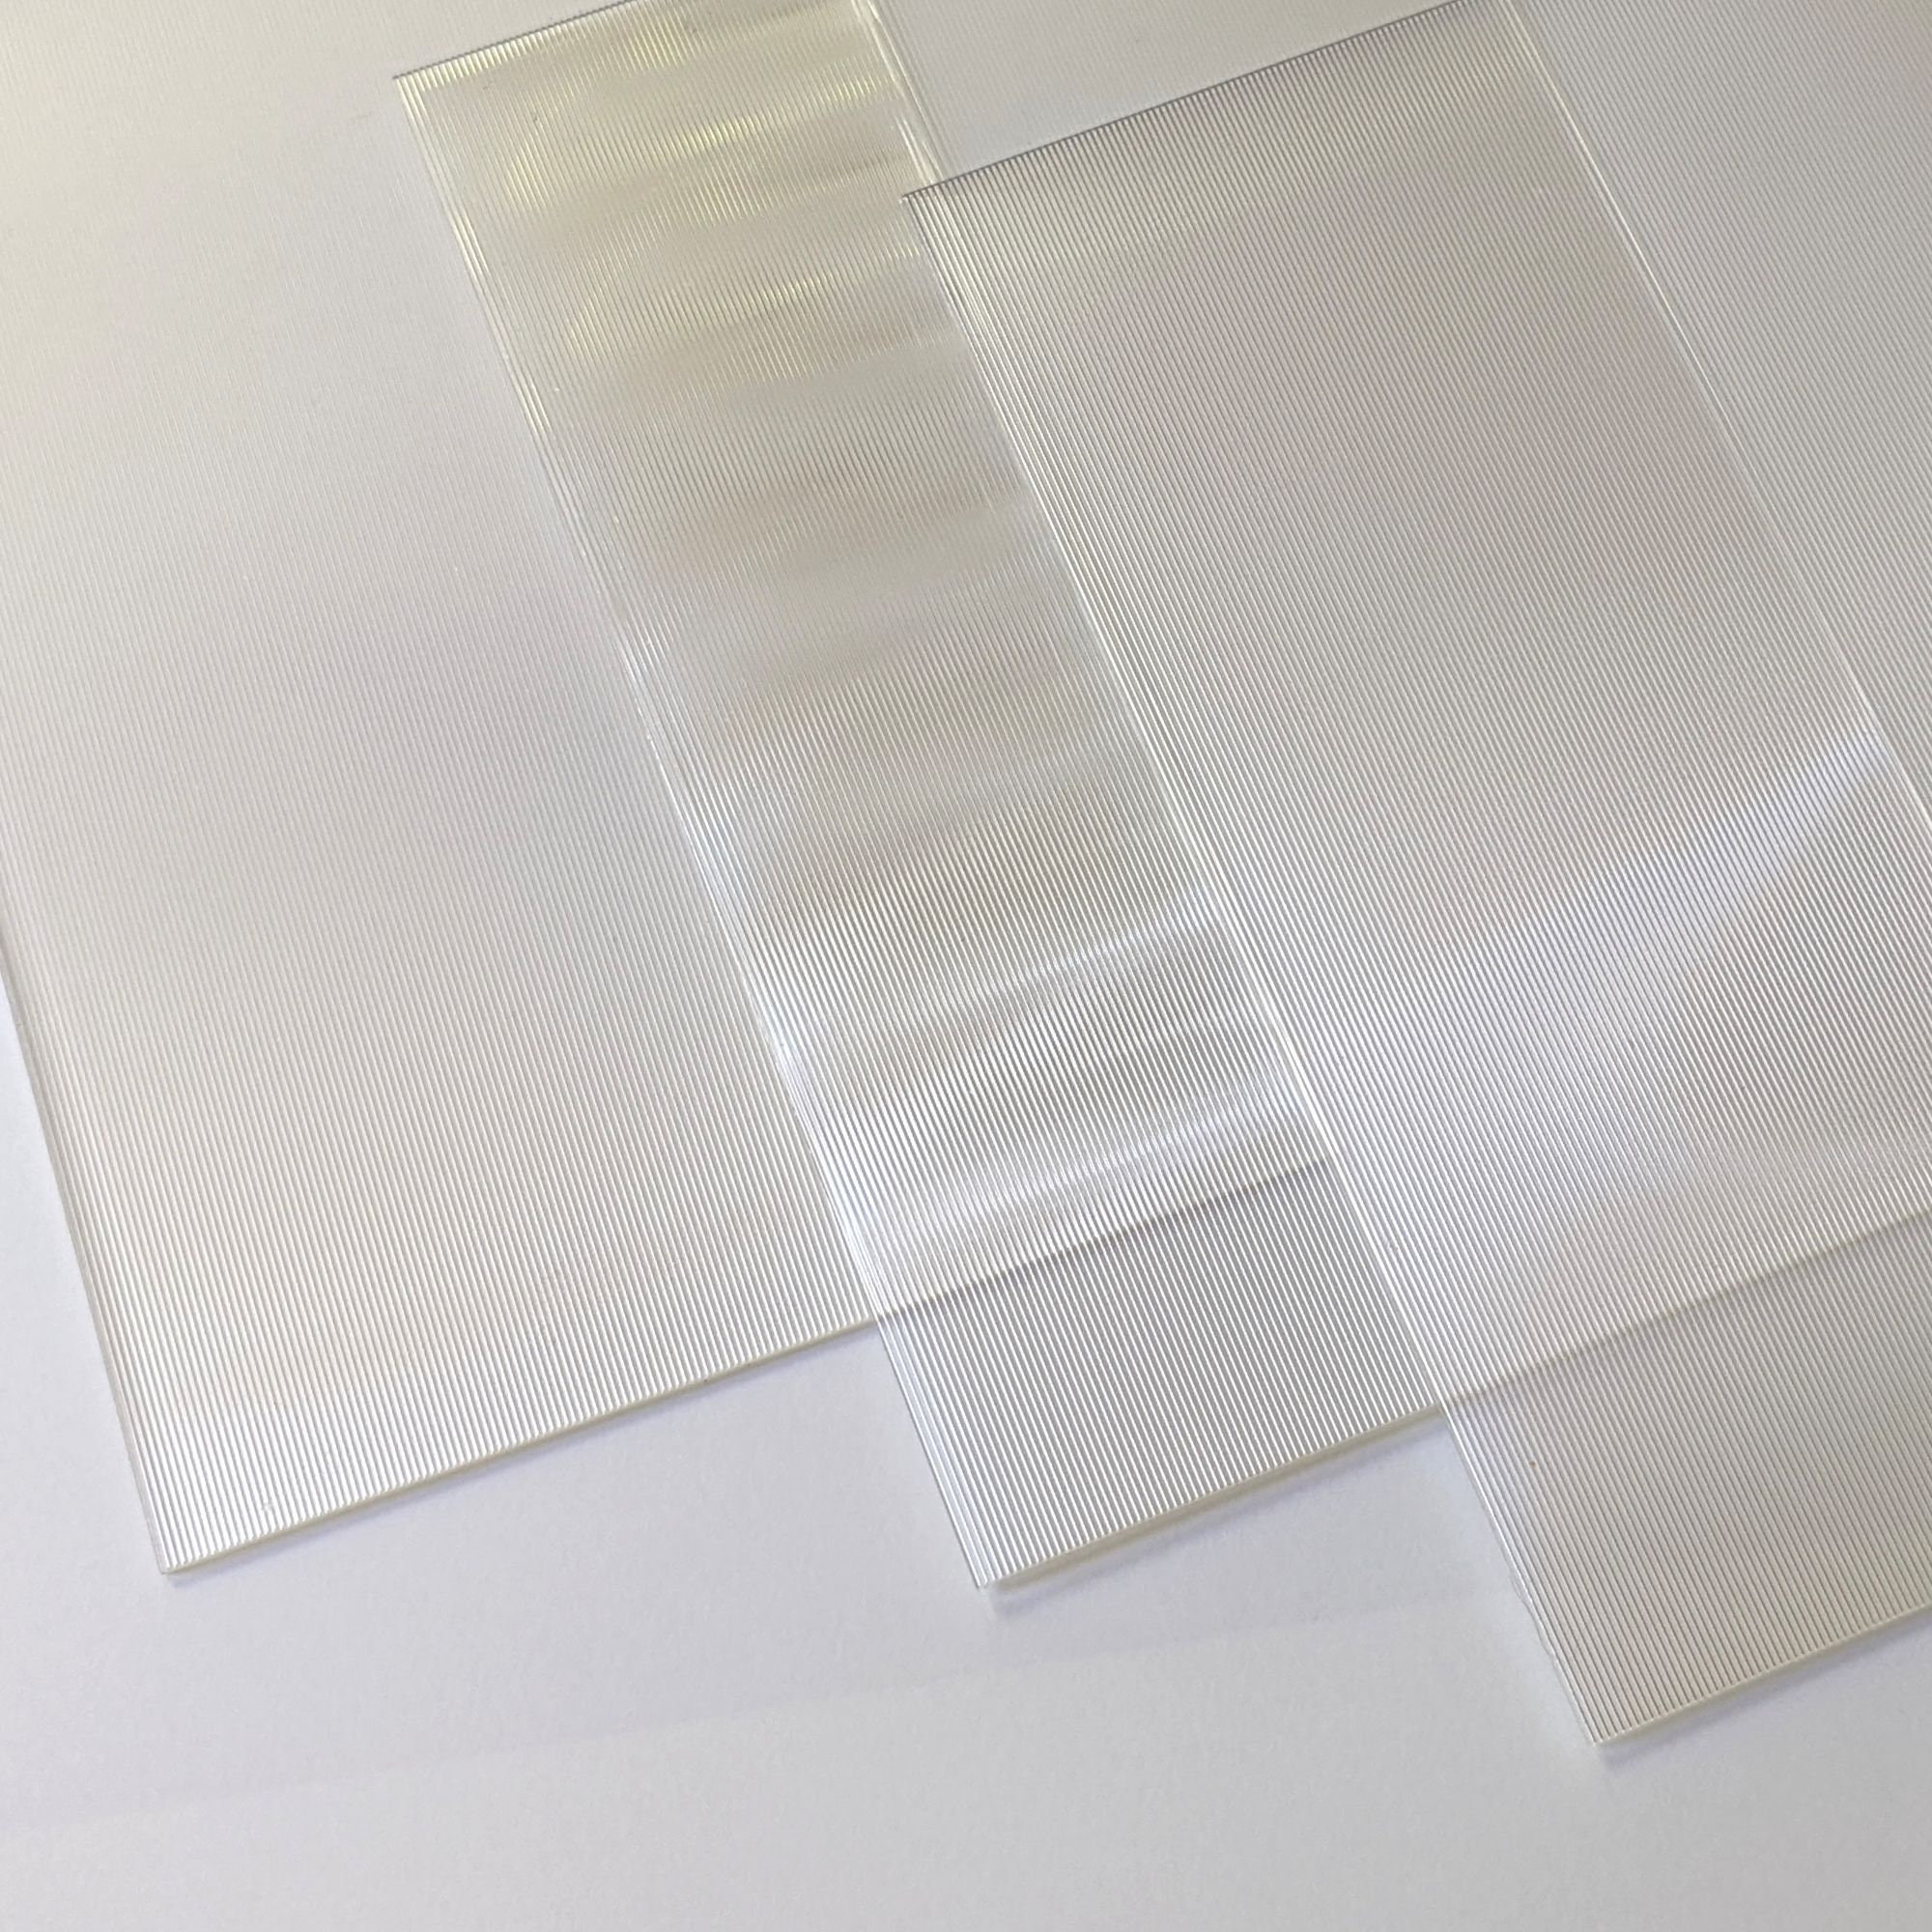 Lenticular Blank 50 LPI Lens Sheets With Adhesive Backing 